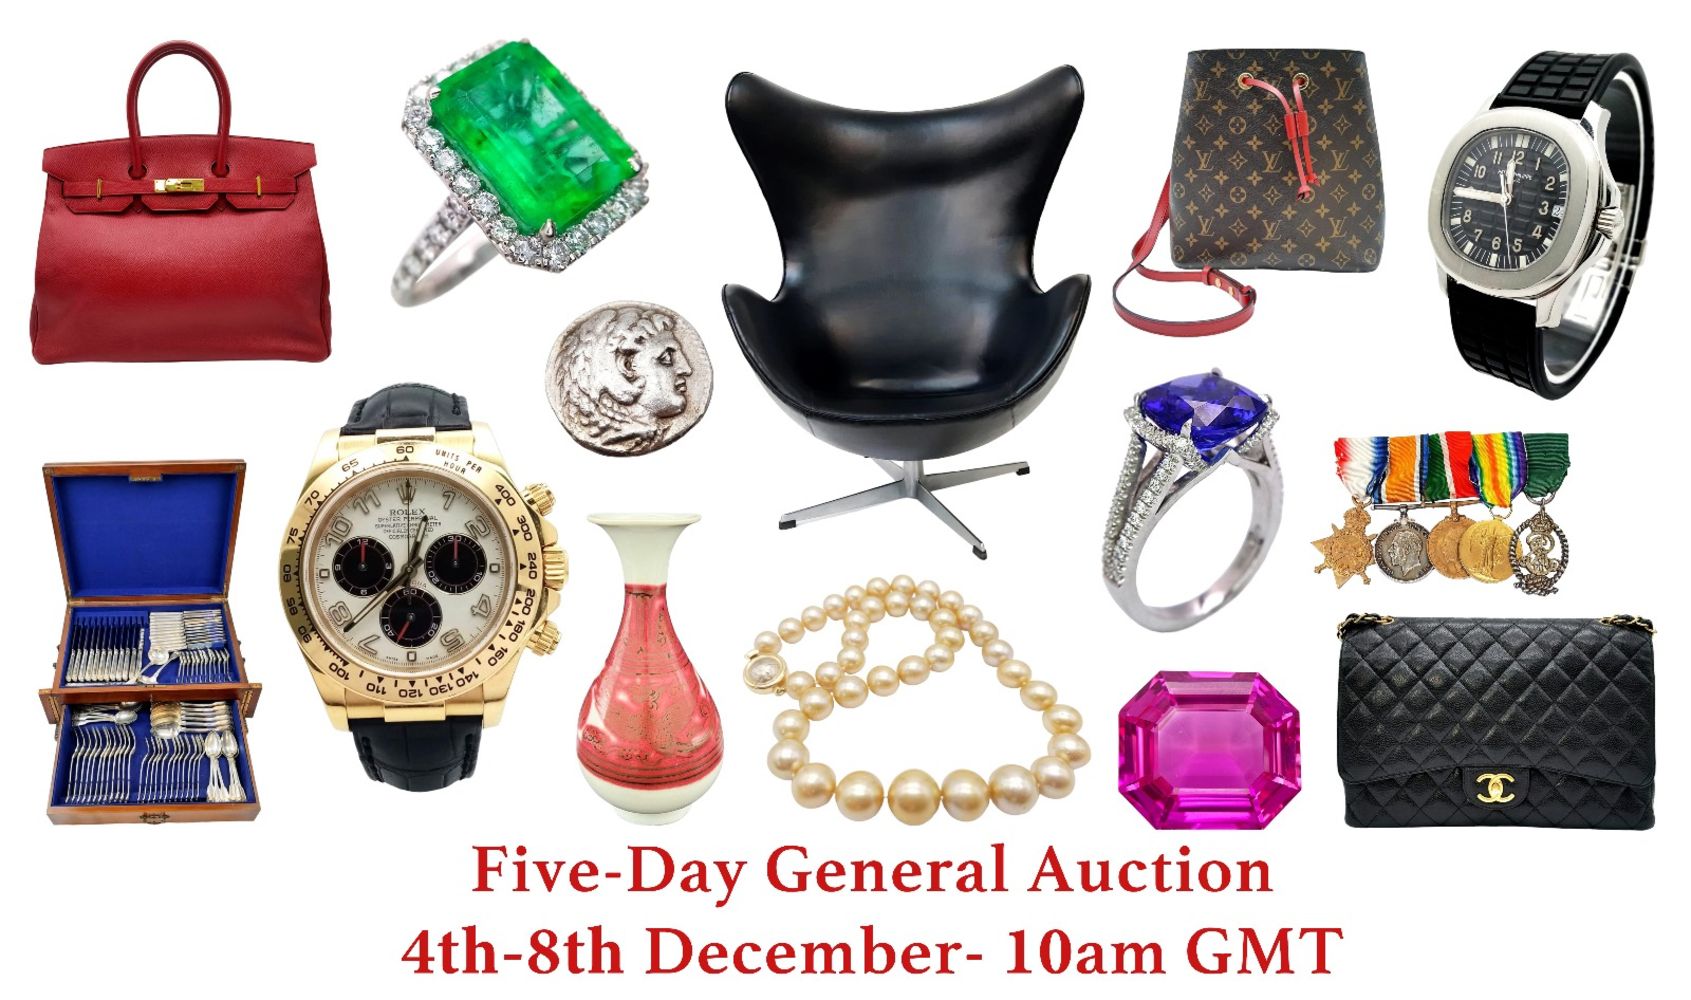 Five-Day Christmas Auction (Jewellery, Watches, Designer Items, Militaria, Antique and Collectables) 2900 lots